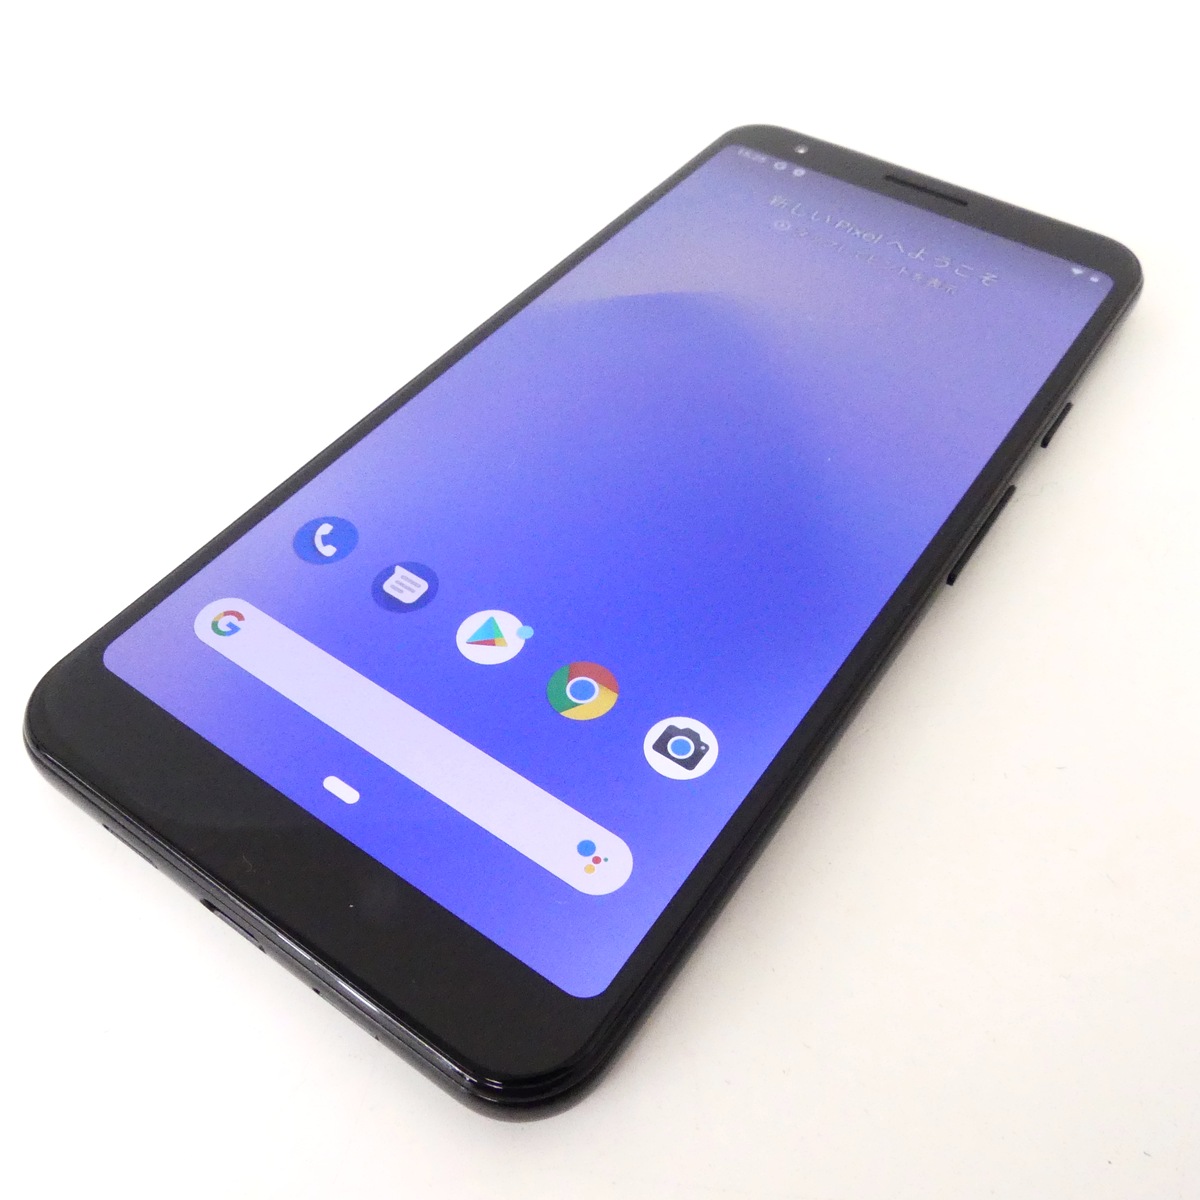 Google Pixel 3a XL （利用制限▲）をお買取りしました